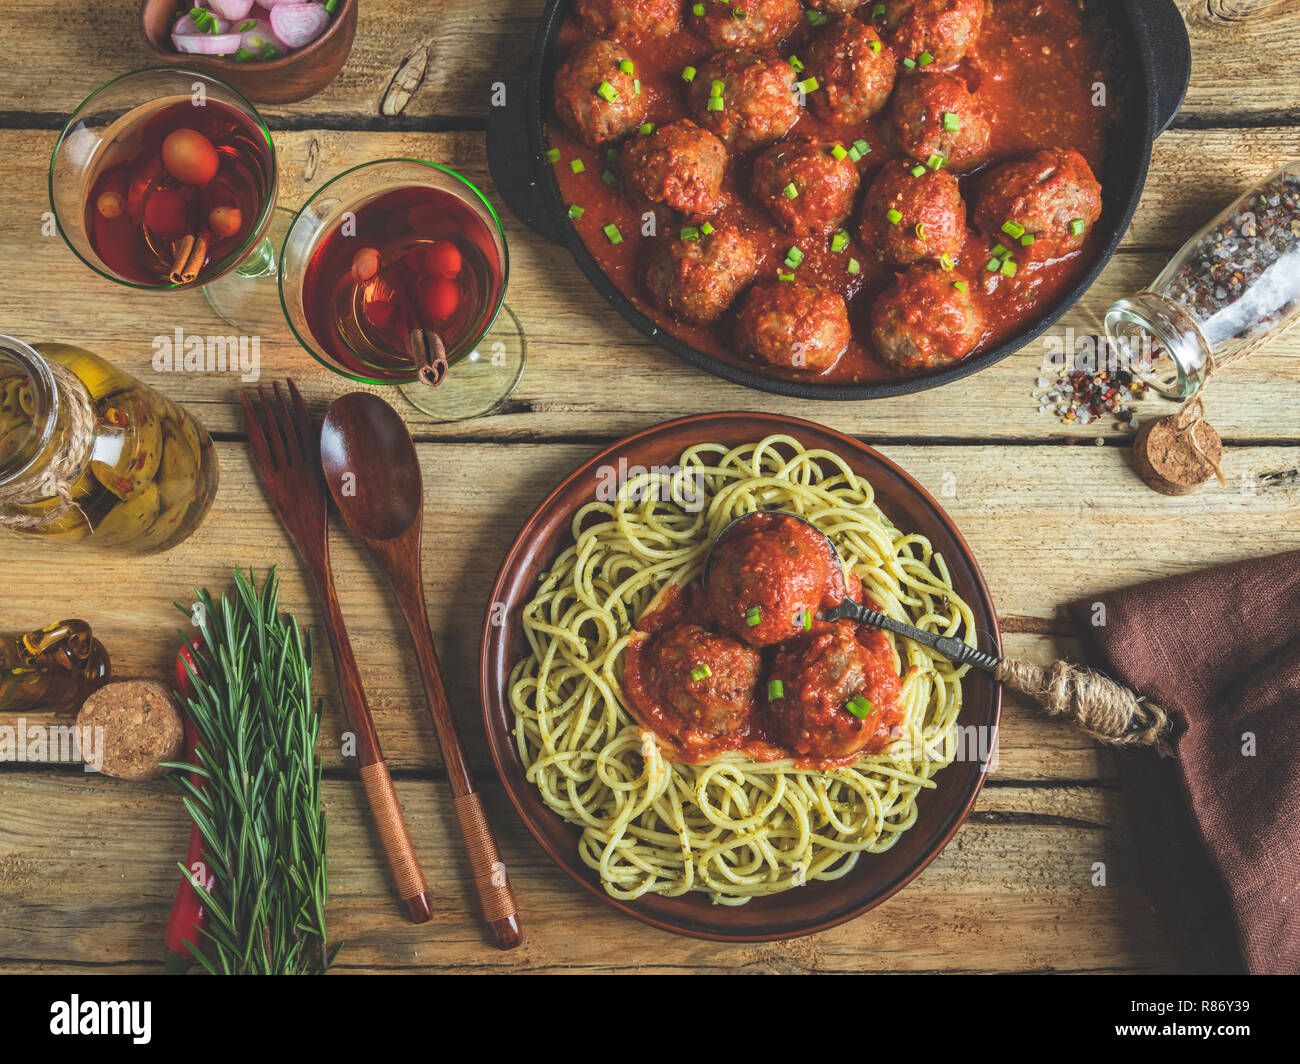 Homemade meatballs in tomato sauce with pasta on a plate. Frying pan on a wooden surface Stock Photo